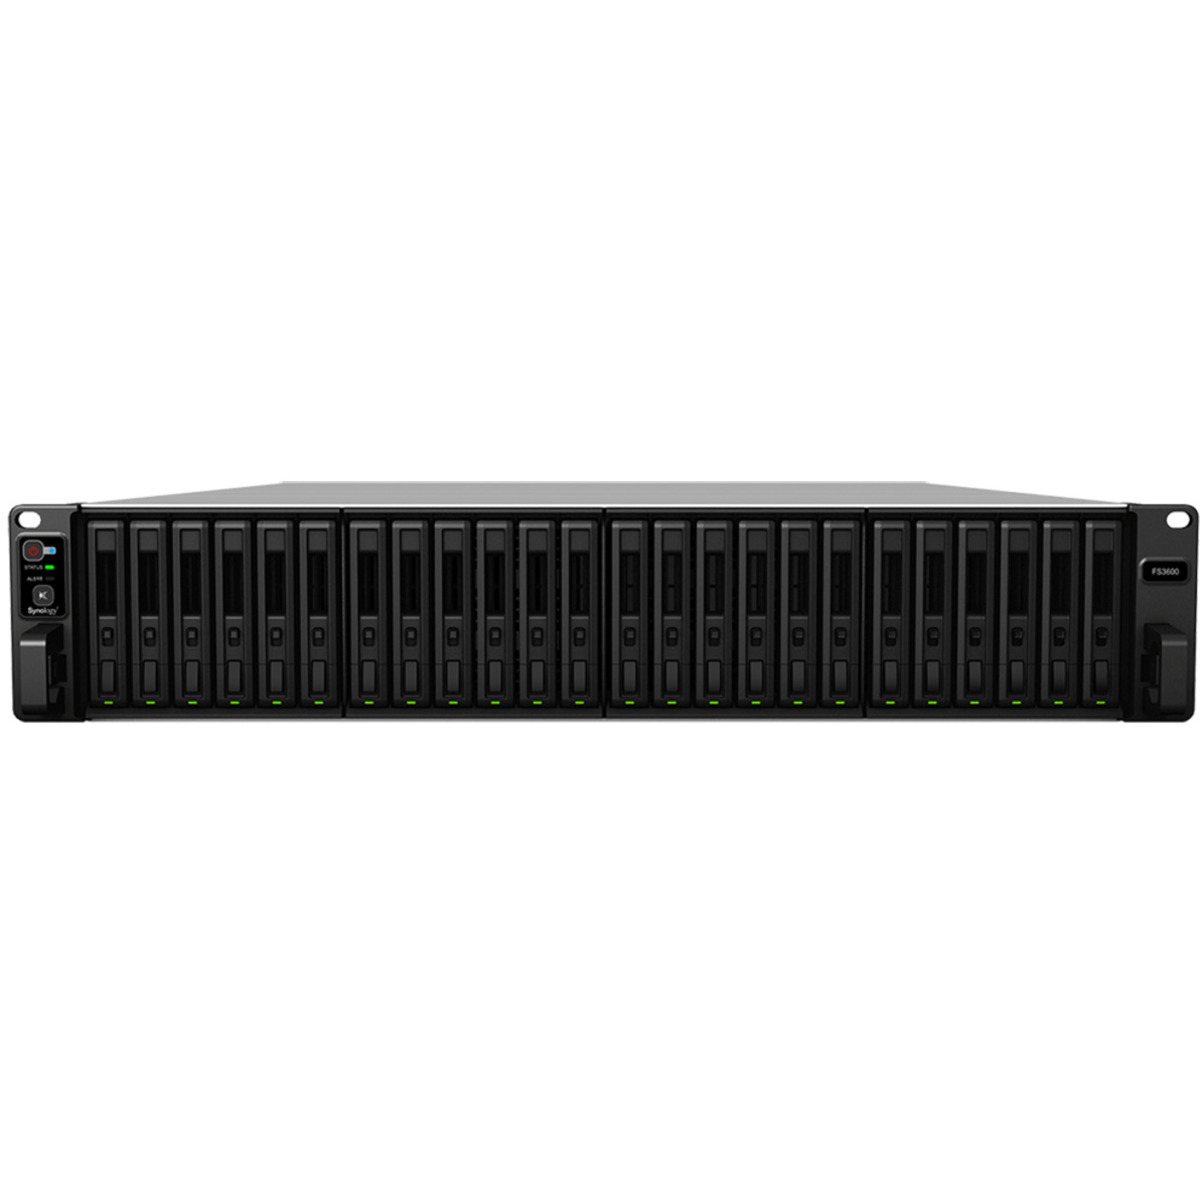 Synology FlashStation FS3600 23tb 24-Bay RackMount Large Business / Enterprise NAS - Network Attached Storage Device 23x1tb Crucial MX500 CT1000MX500SSD1 2.5 560/510MB/s SATA 6Gb/s SSD CONSUMER Class Drives Installed - Burn-In Tested - FREE RAM UPGRADE FlashStation FS3600